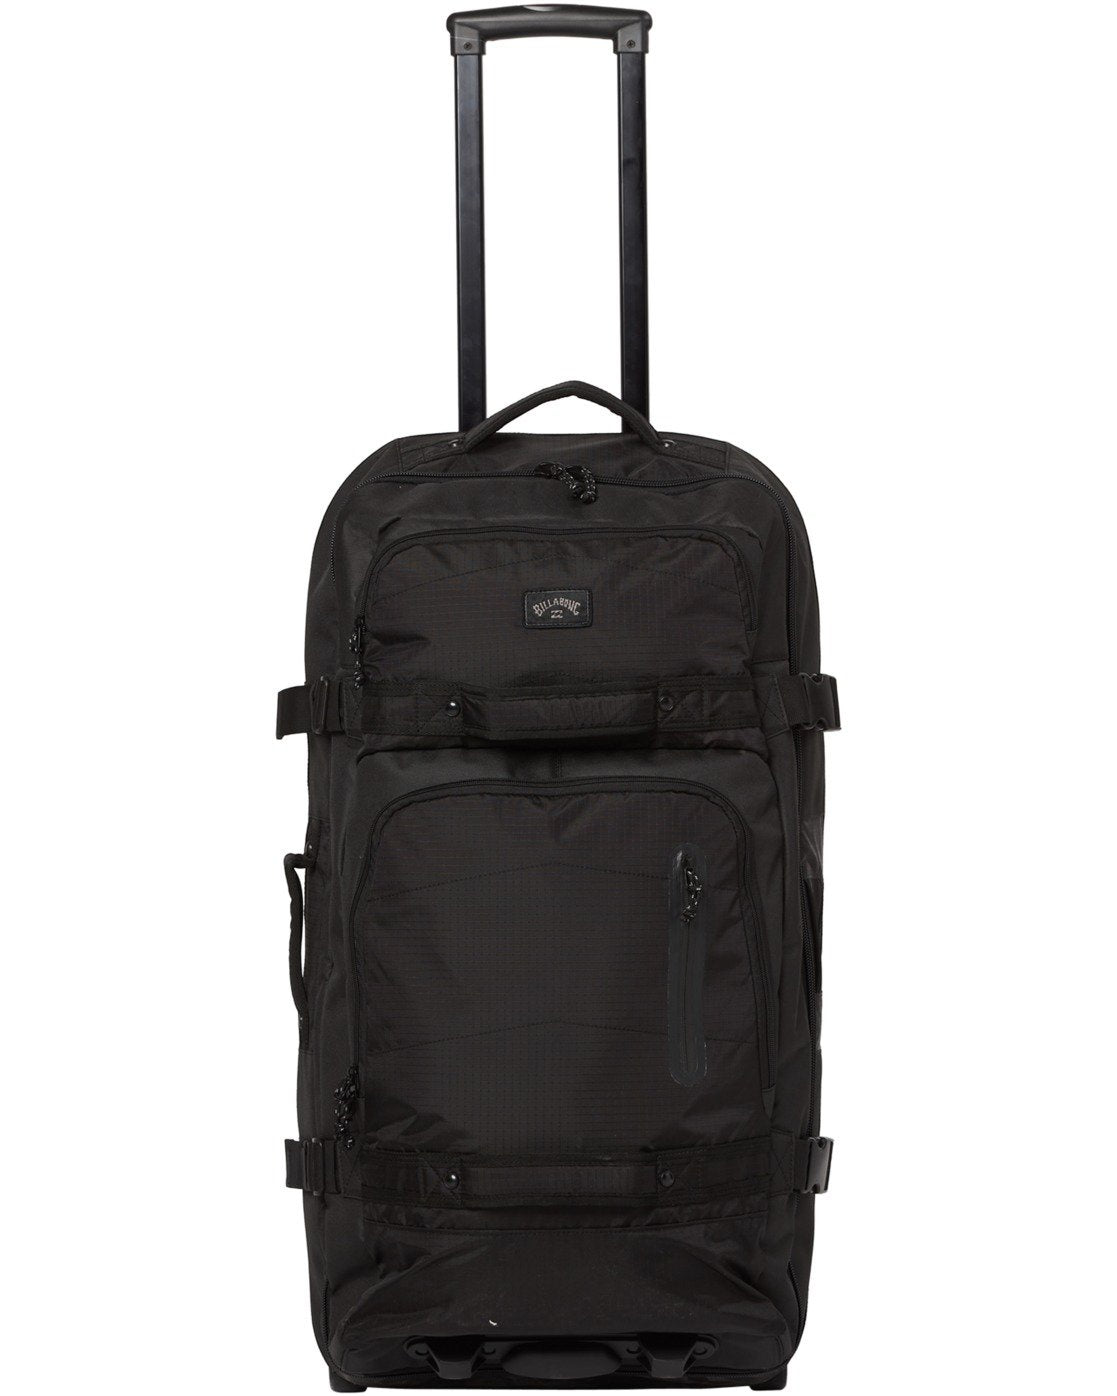 Booster 110L Travel Luggage